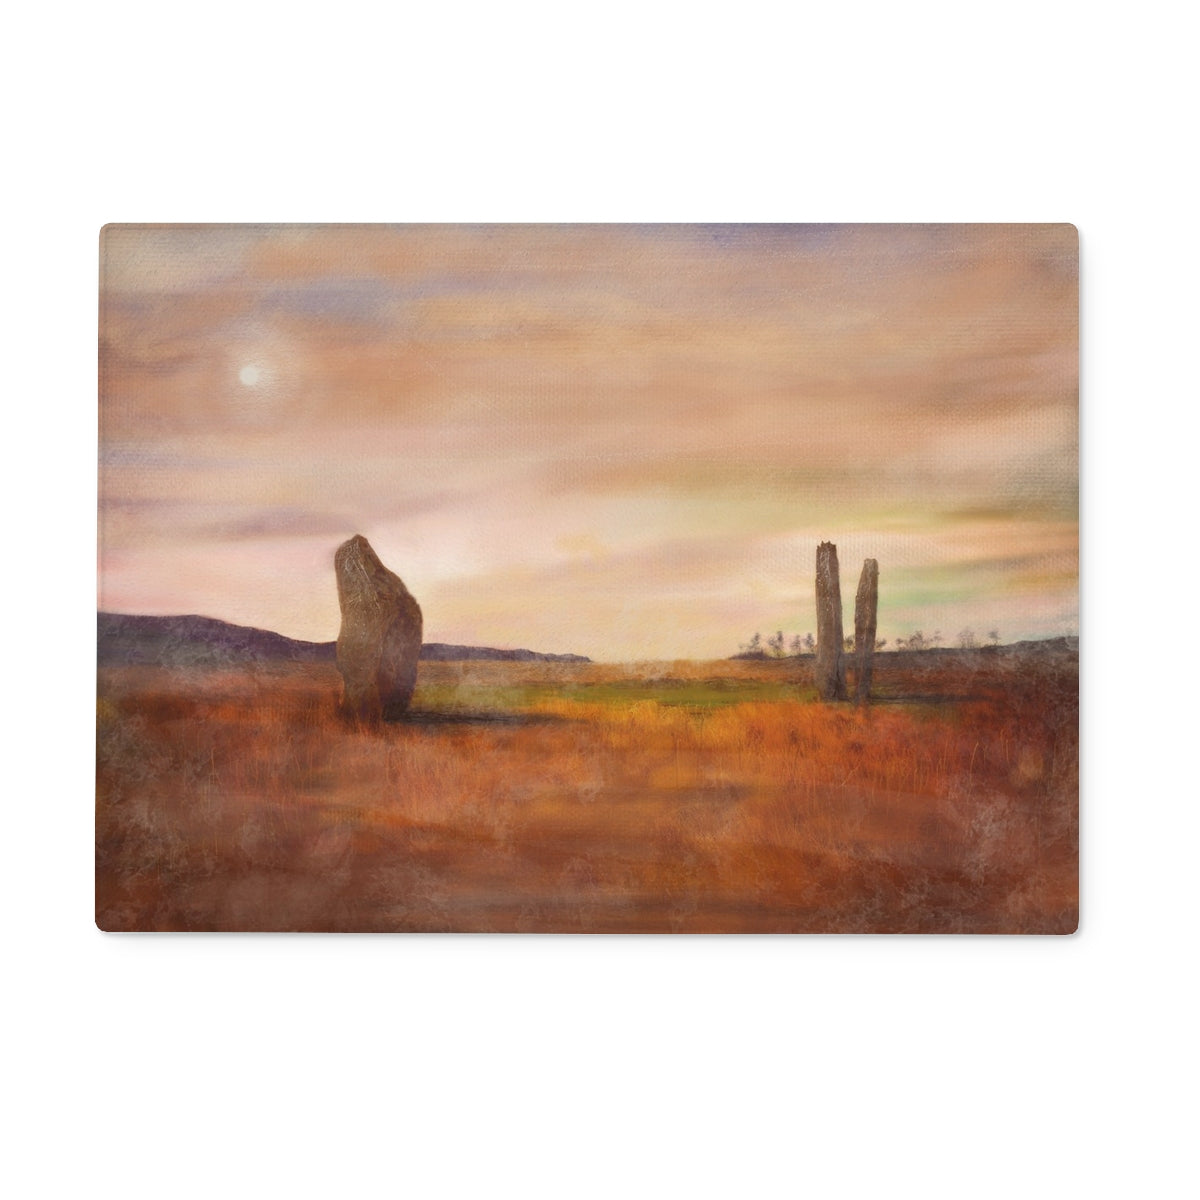 Machrie Moor Arran Art Gifts Glass Chopping Board-Glass Chopping Boards-Arran Art Gallery-15"x11" Rectangular-Paintings, Prints, Homeware, Art Gifts From Scotland By Scottish Artist Kevin Hunter